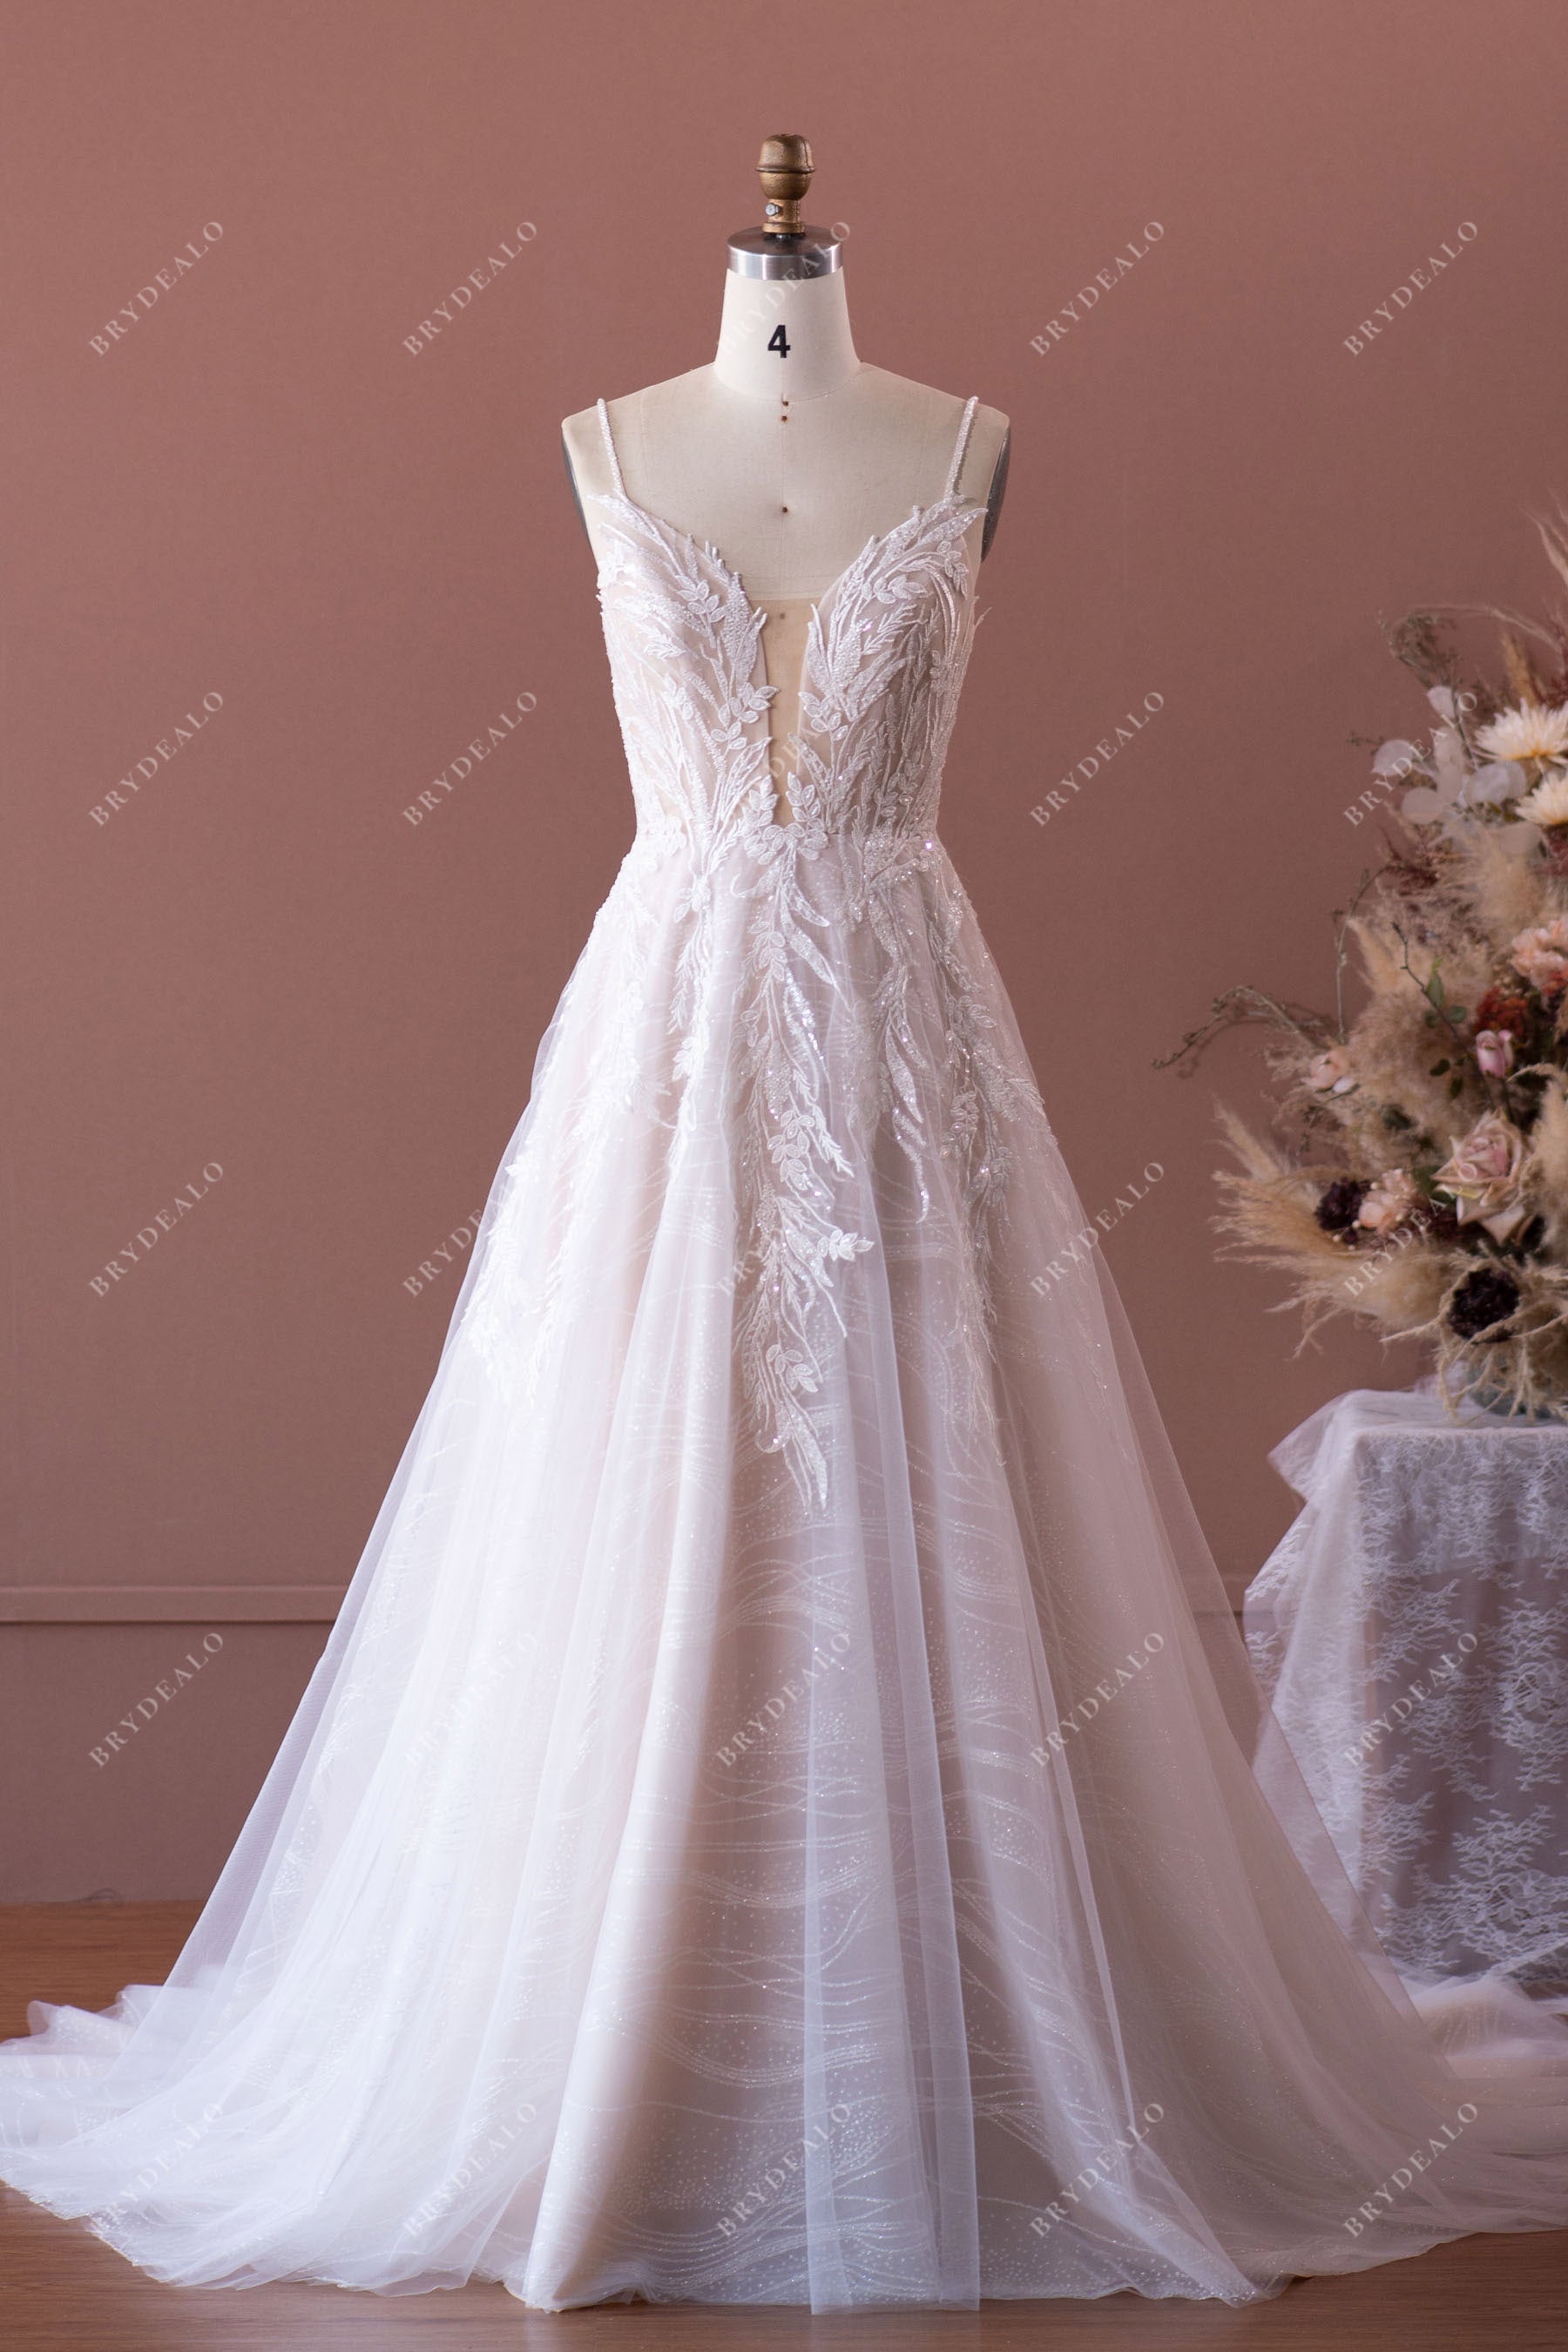 RHEA / Glitter Wedding Dress with Beaded Straps - LaceMarry